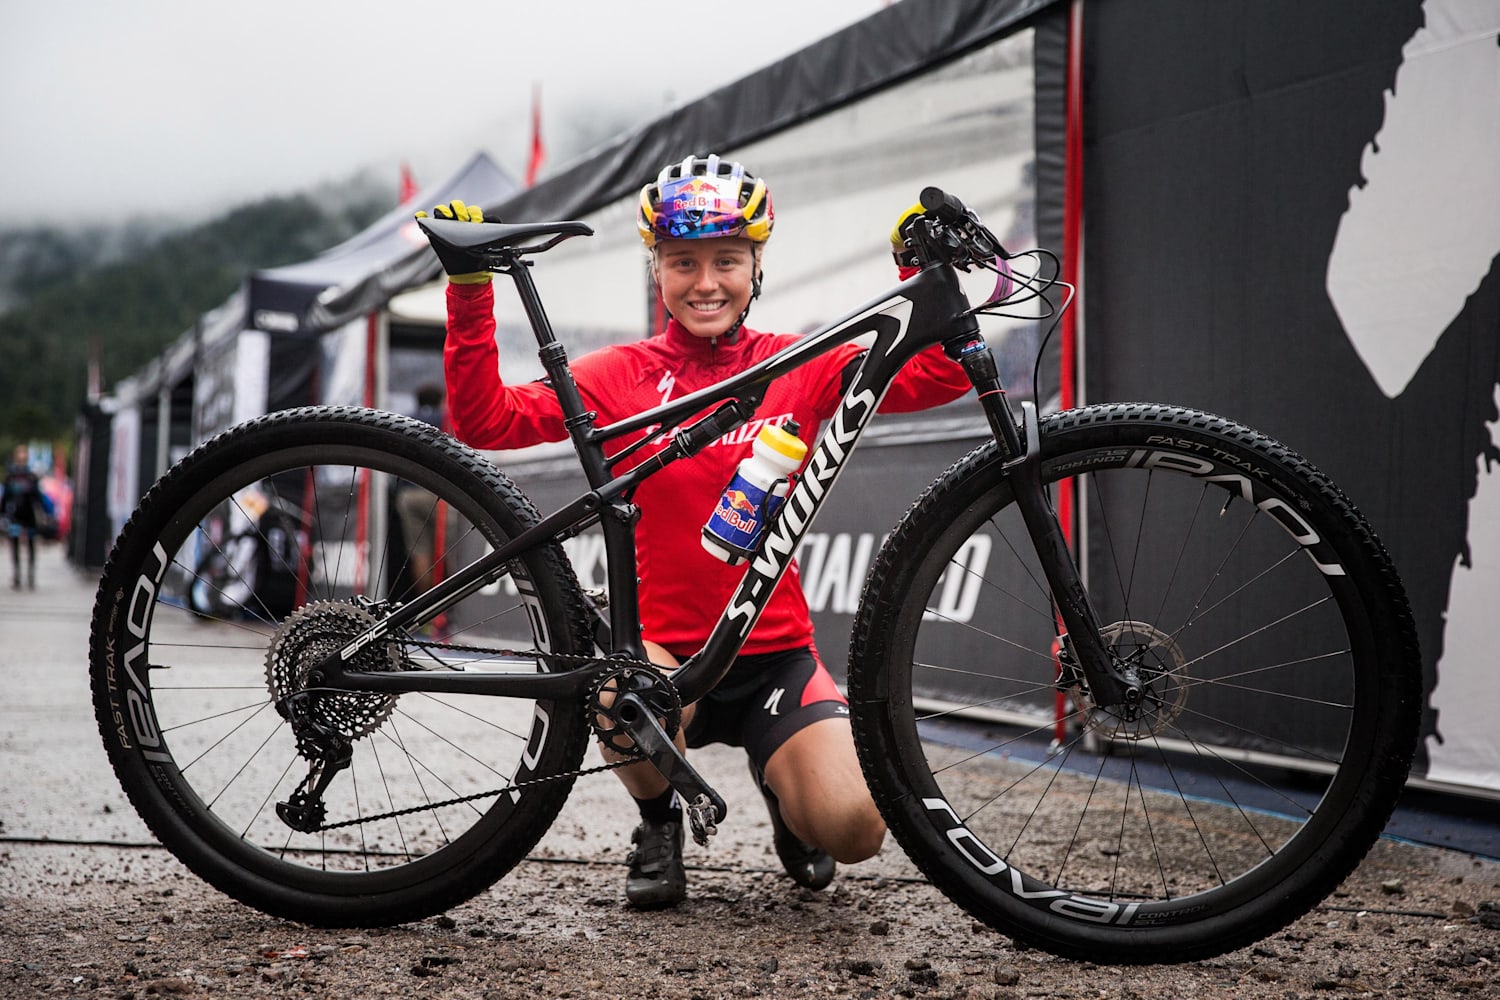 specialized epic s works 2018